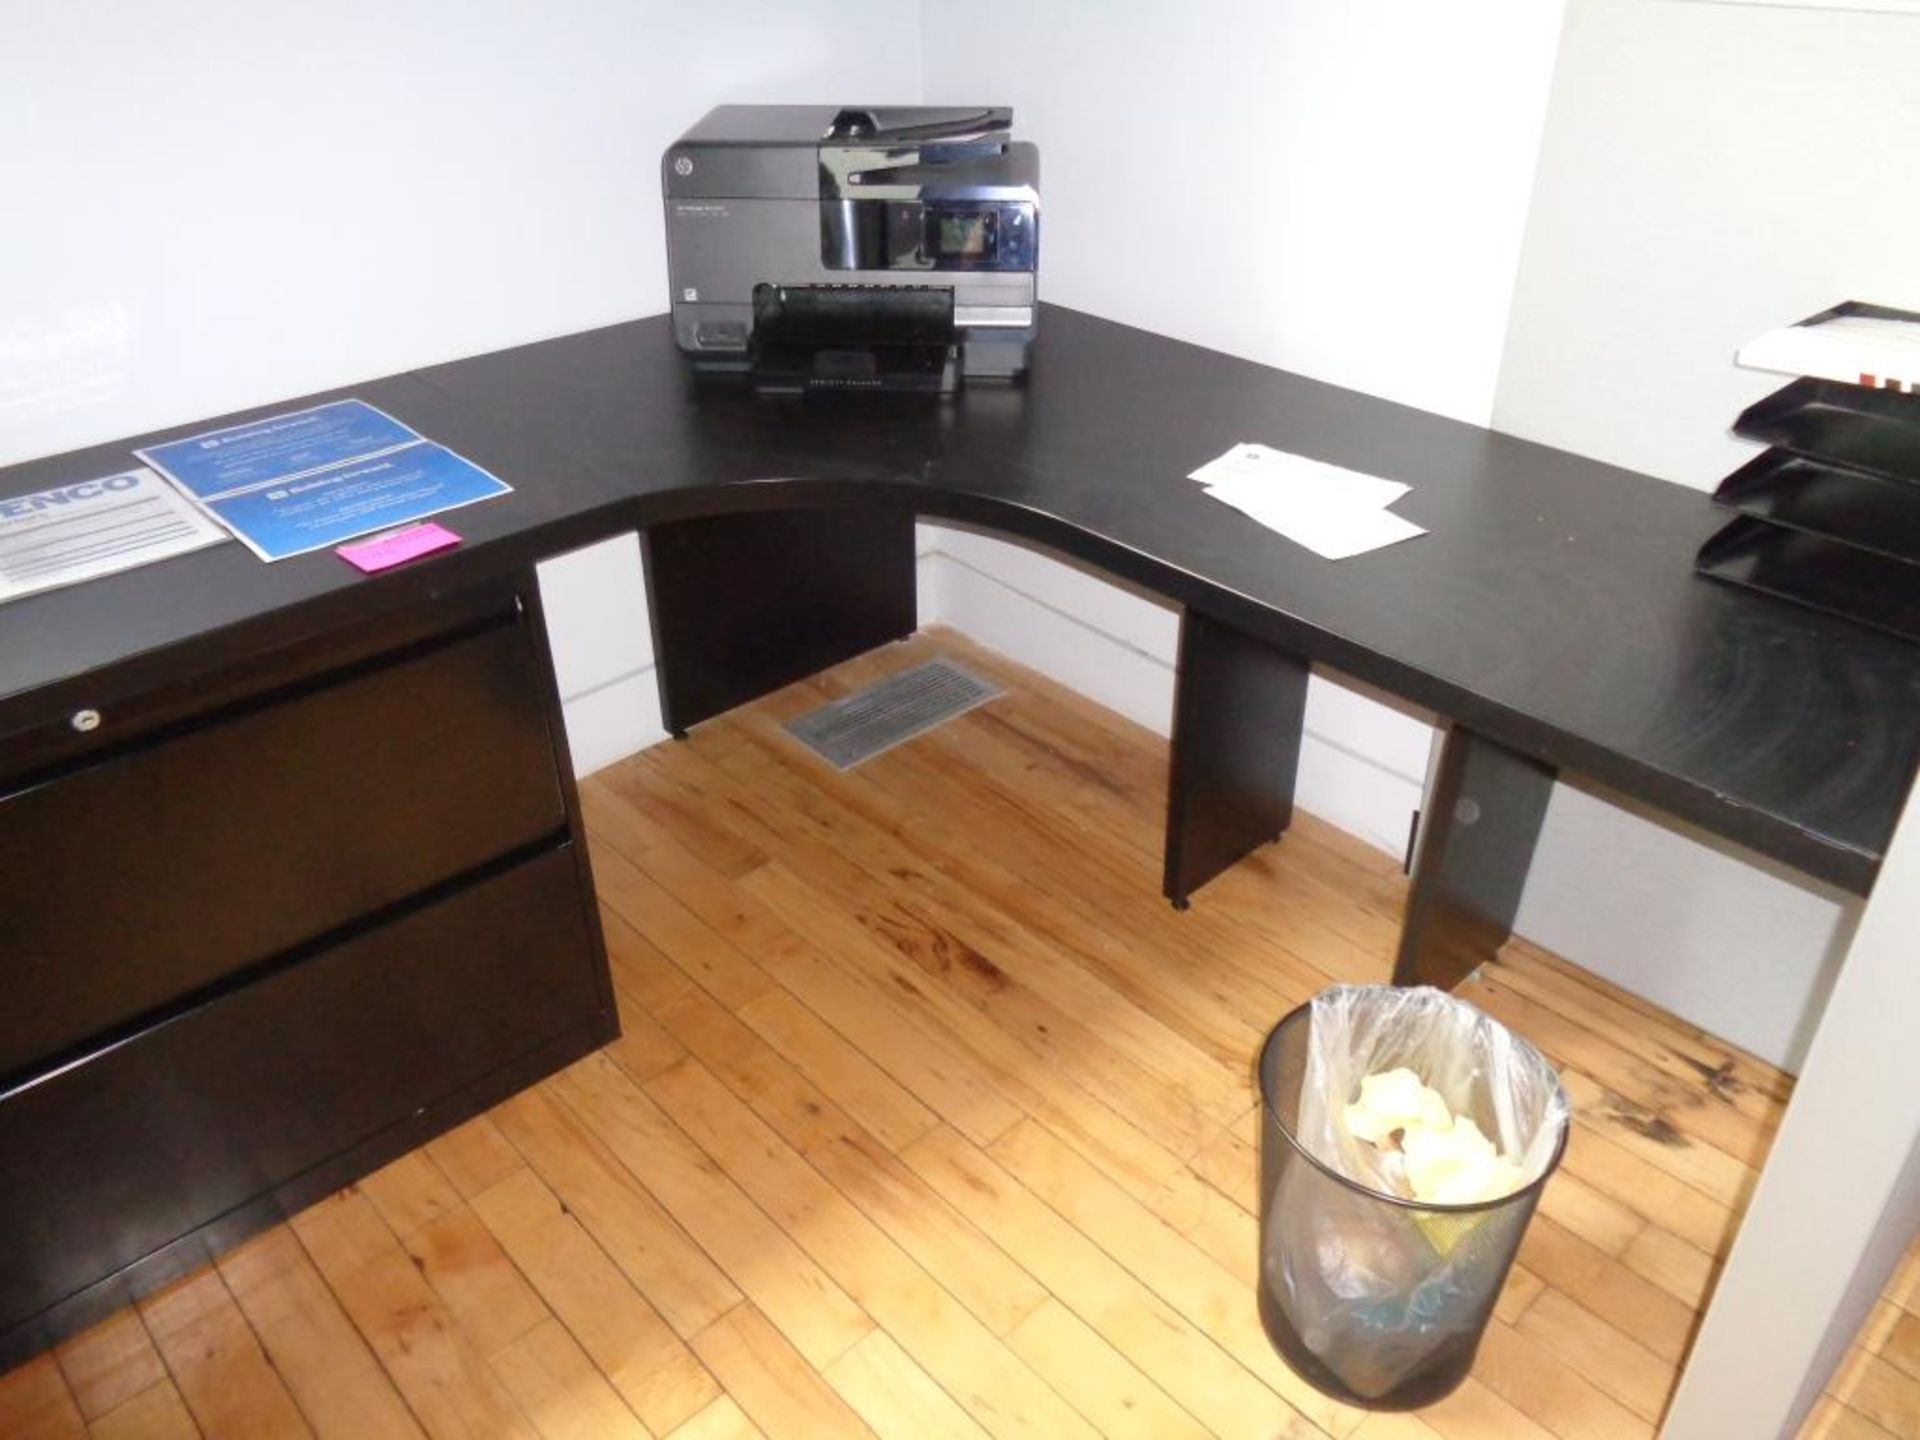 LOT OF: FIRST FLOOR WORKSTATION TO INCLUDE 3-PIECE DESK 112" X 77" - Image 2 of 2